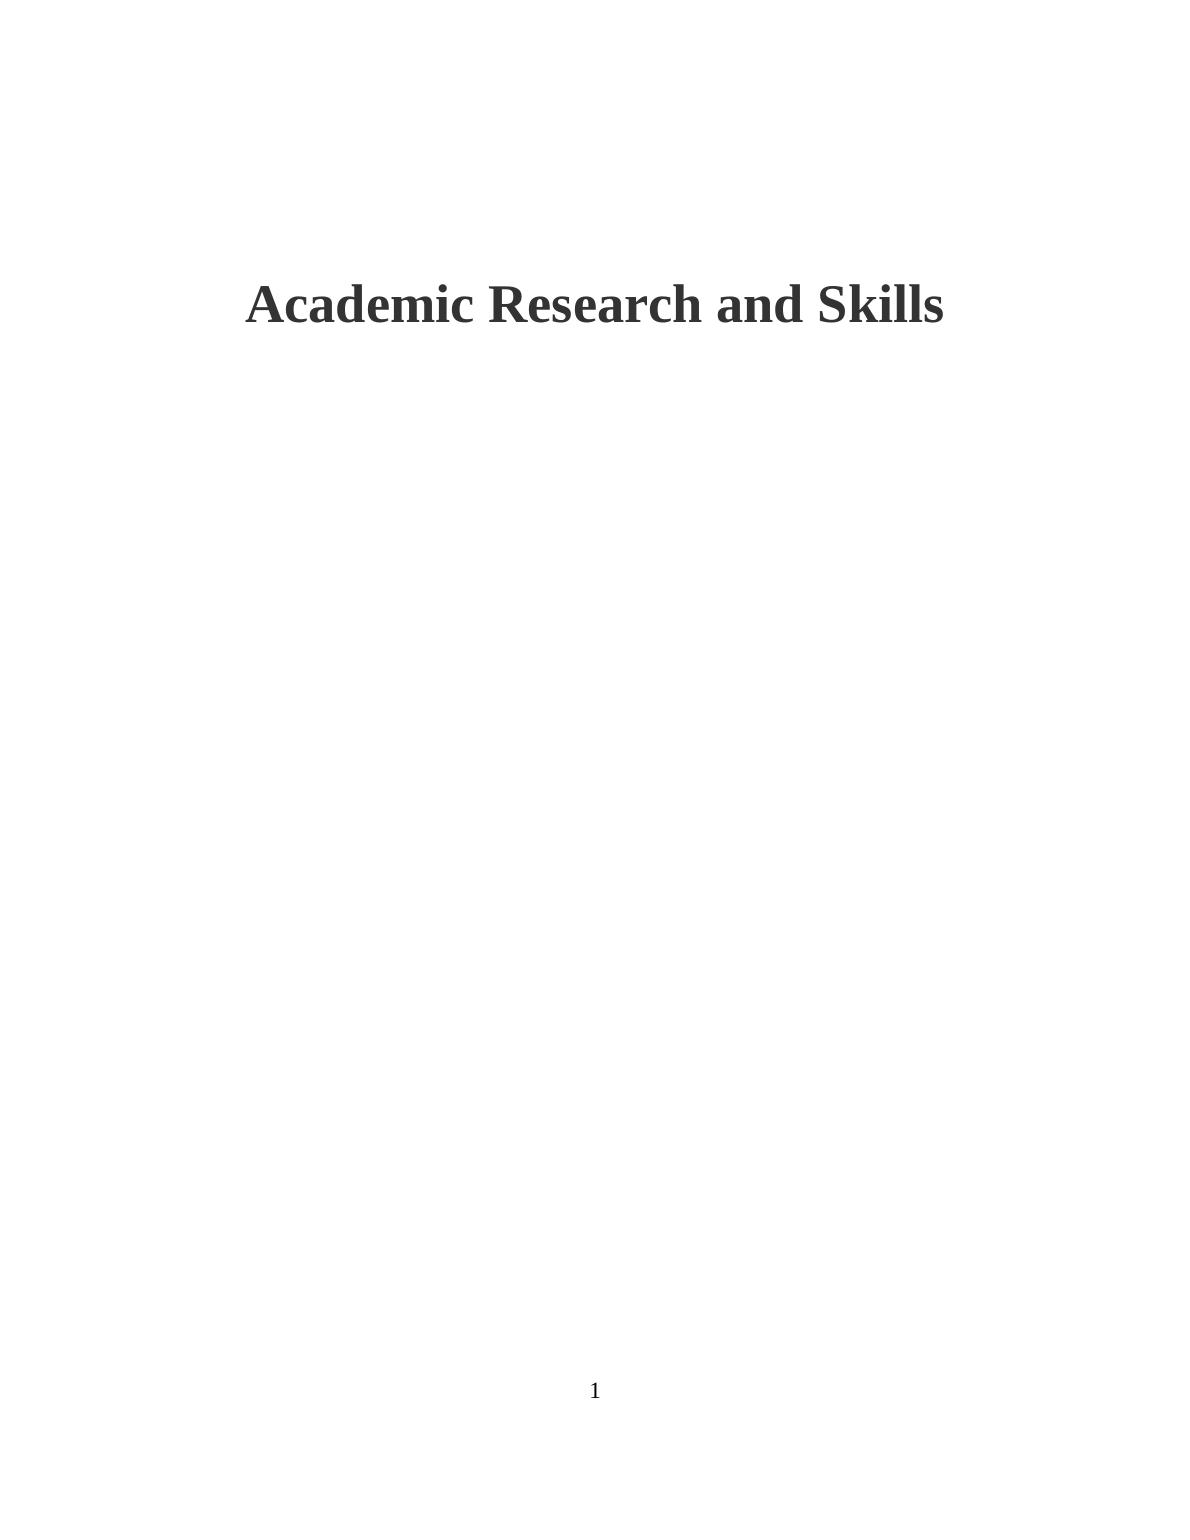 Academic Research and Skills_1